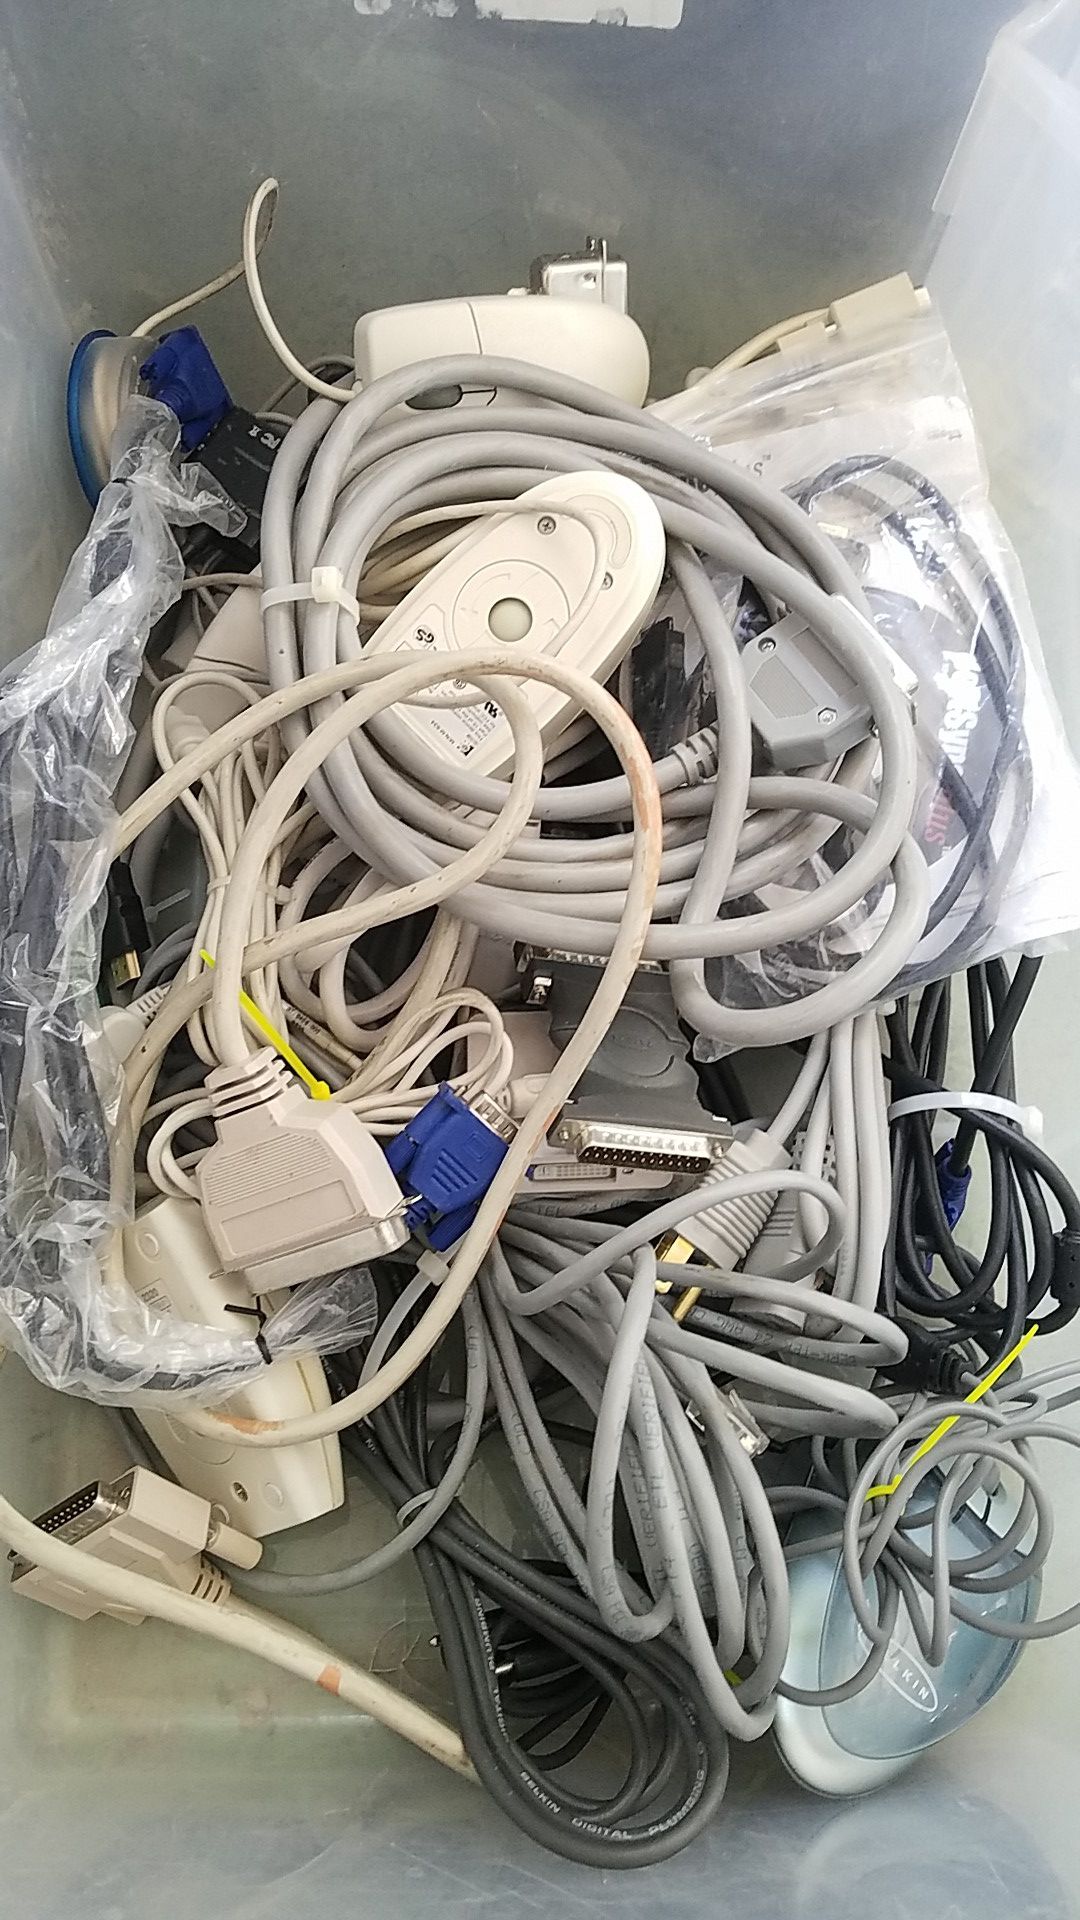 Box of older Computer printer monitor cables cable